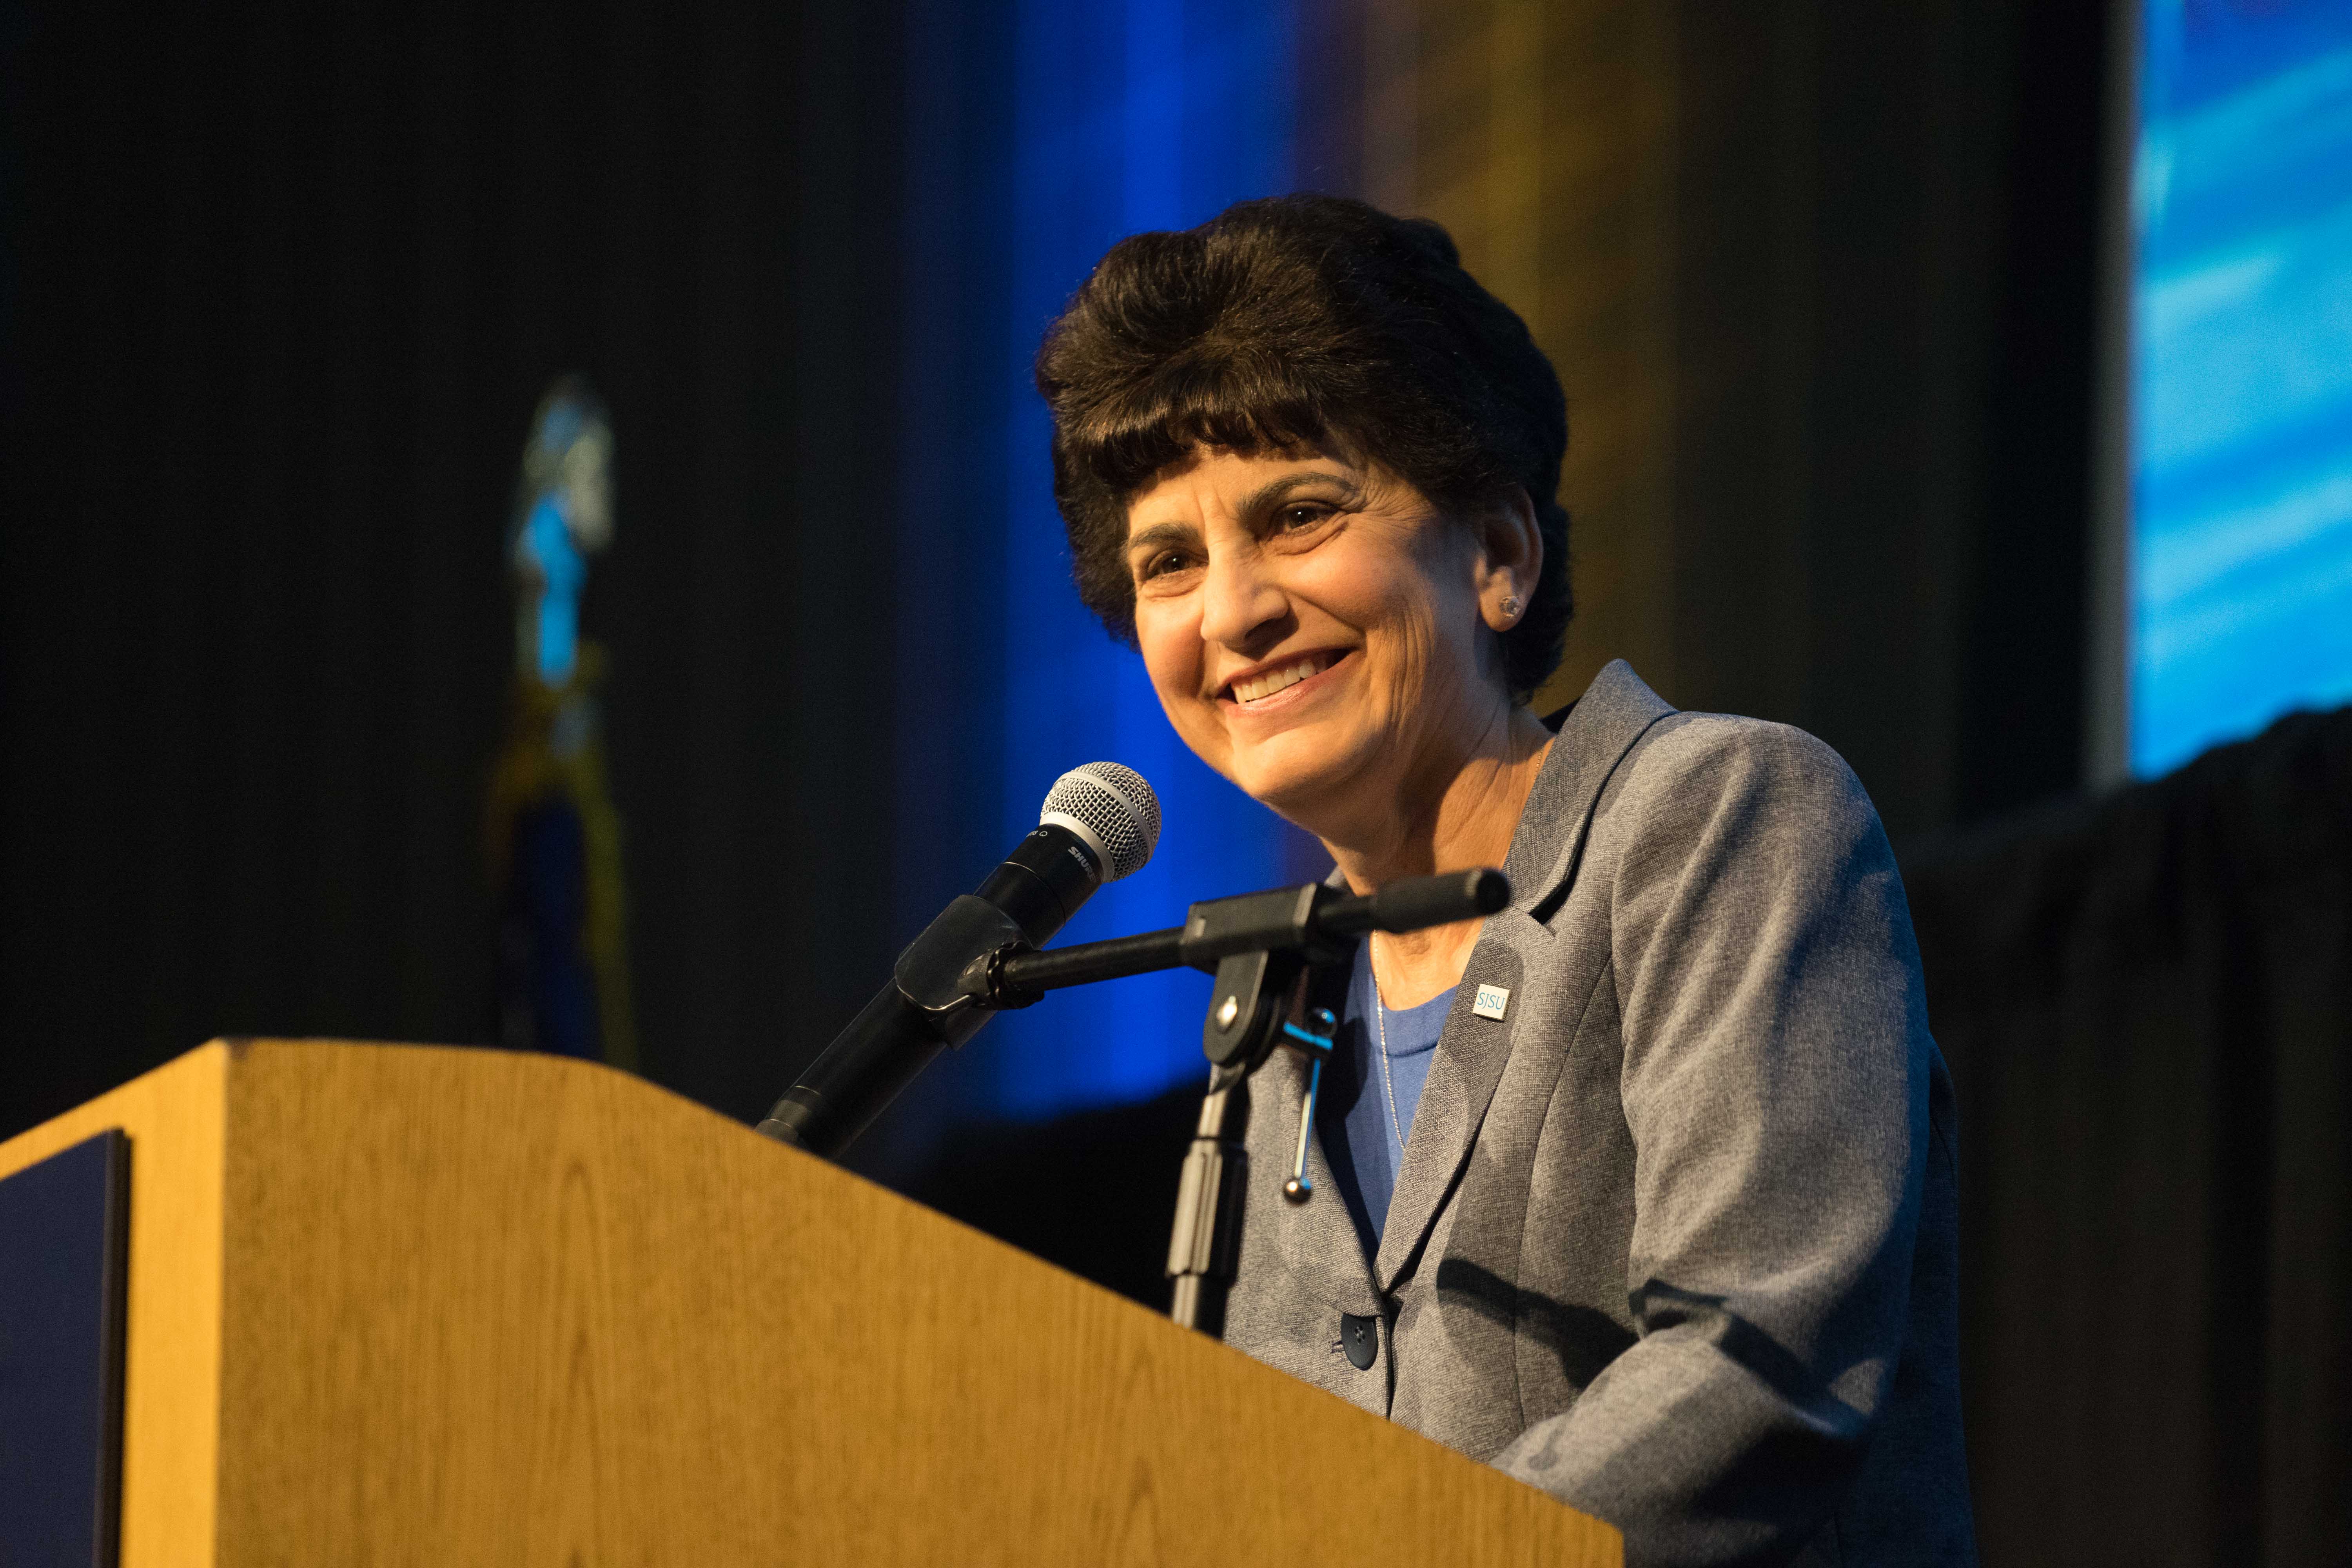 President Papazian delivers the Fall Welcome Address Aug. 24 at the Diaz Compean Student Union ballroom. (Photo: James Tensuan, '15 Photojournalism).